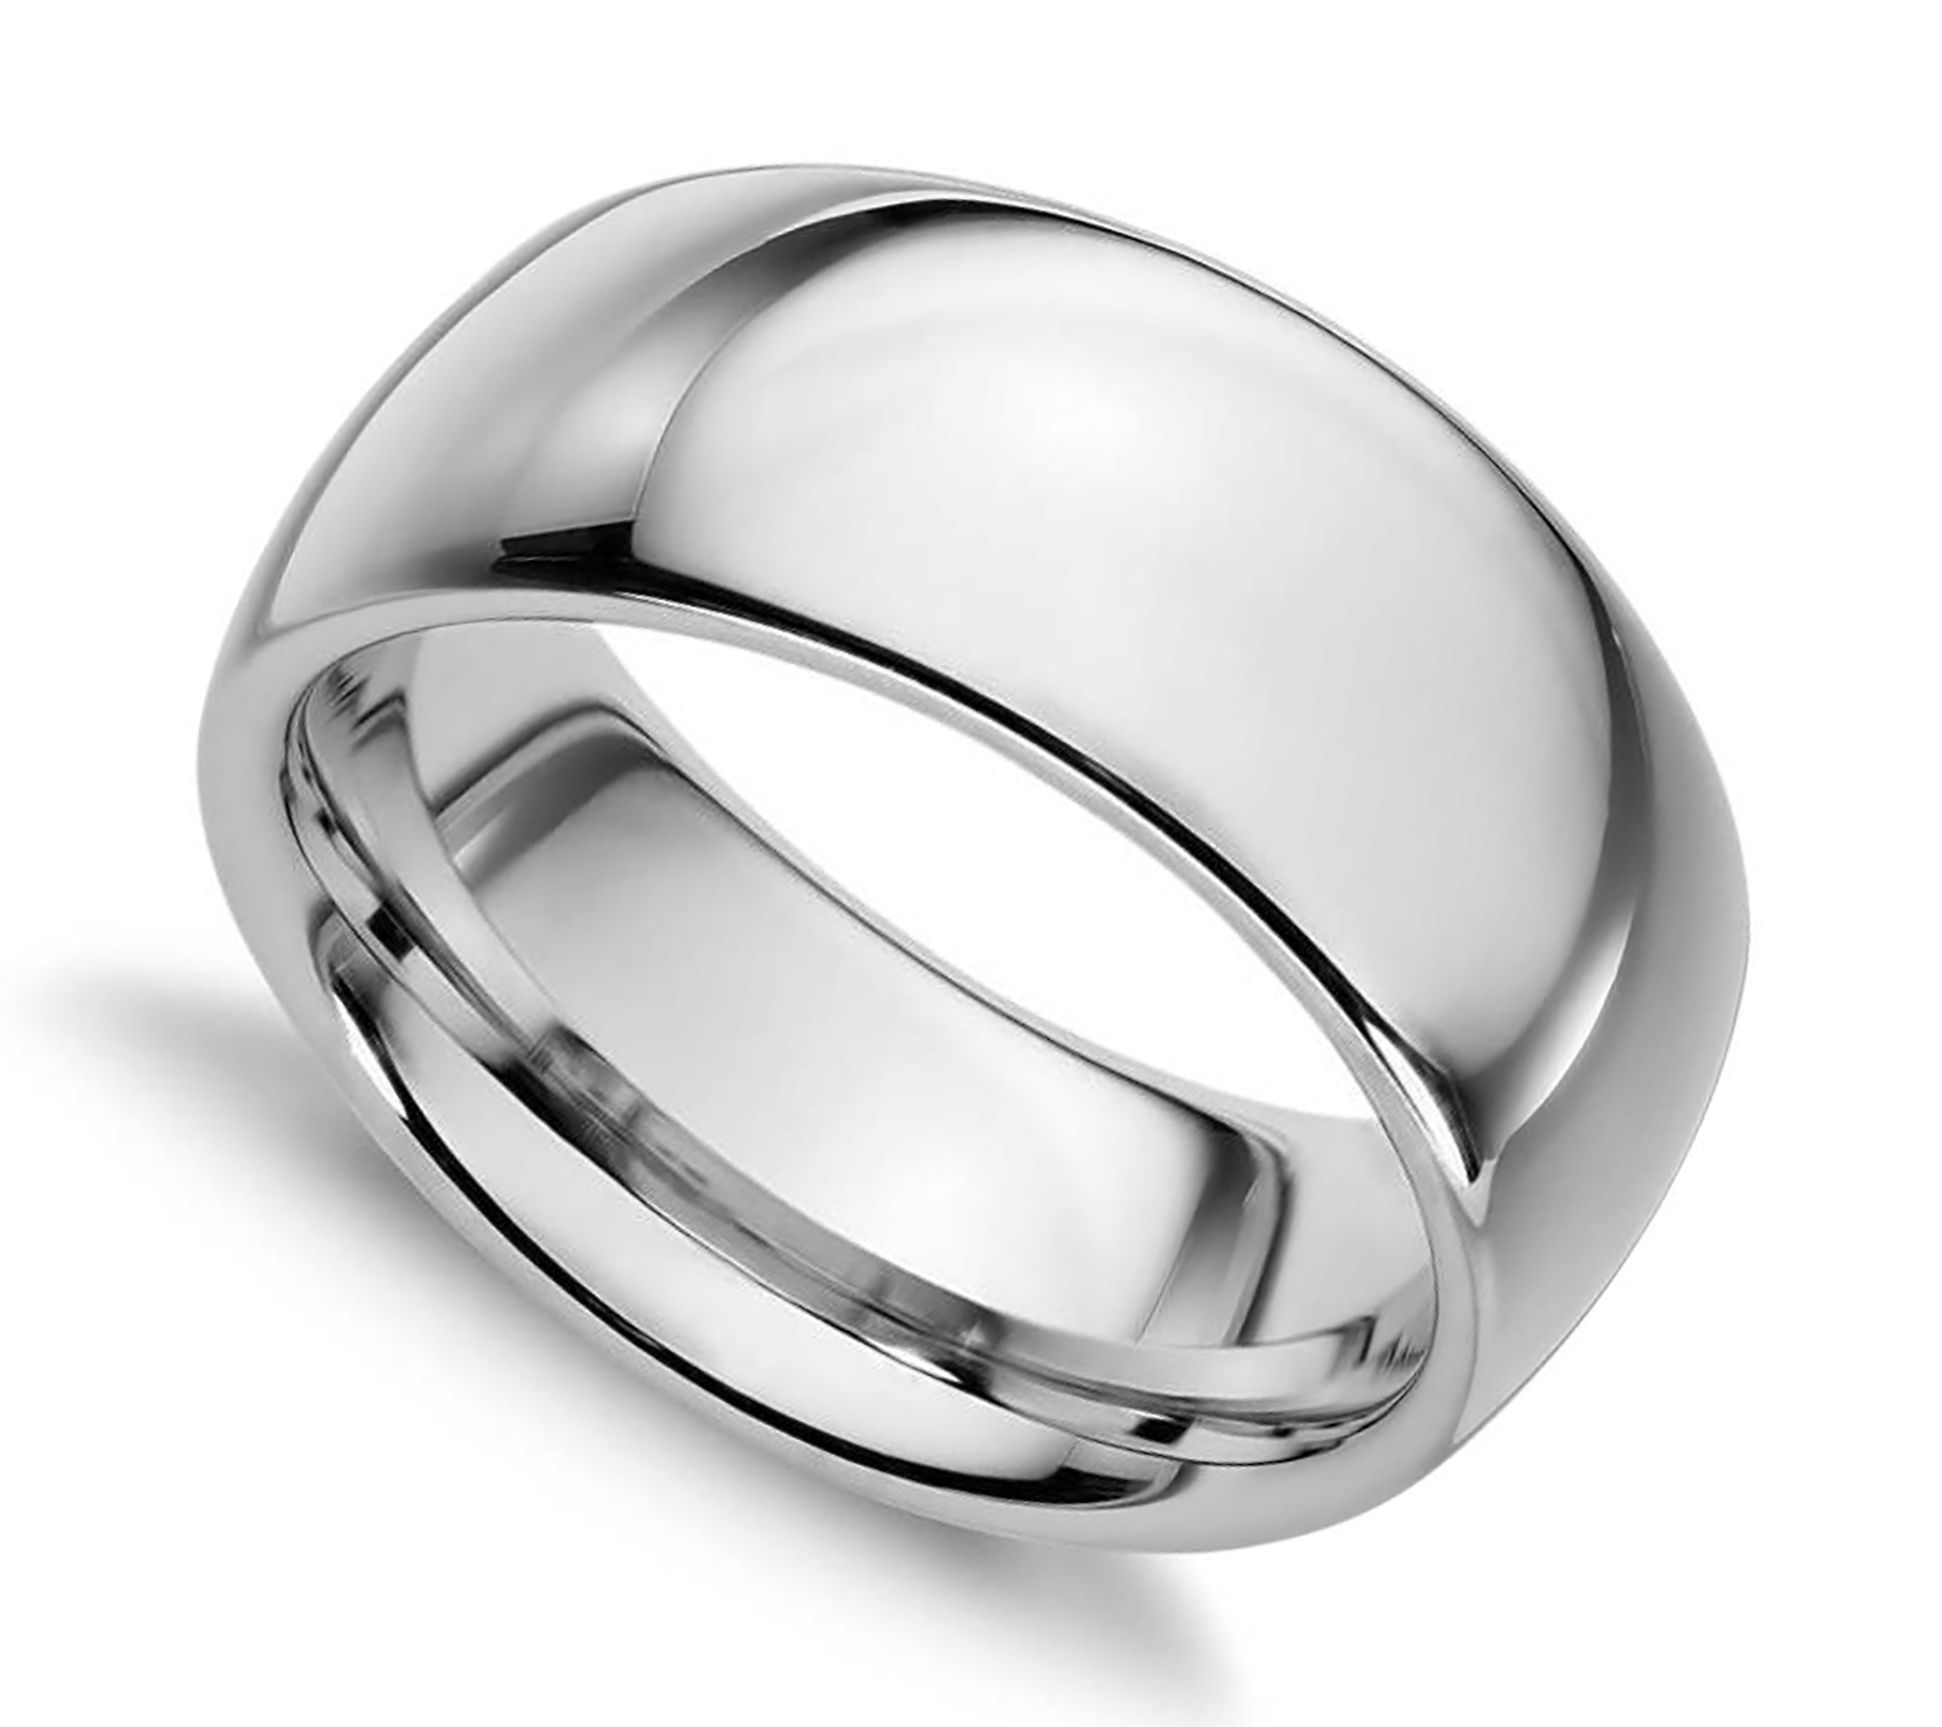 Jewelry Stores Network 6mm Sterling Silver Polished Grooved Wedding Band Ring